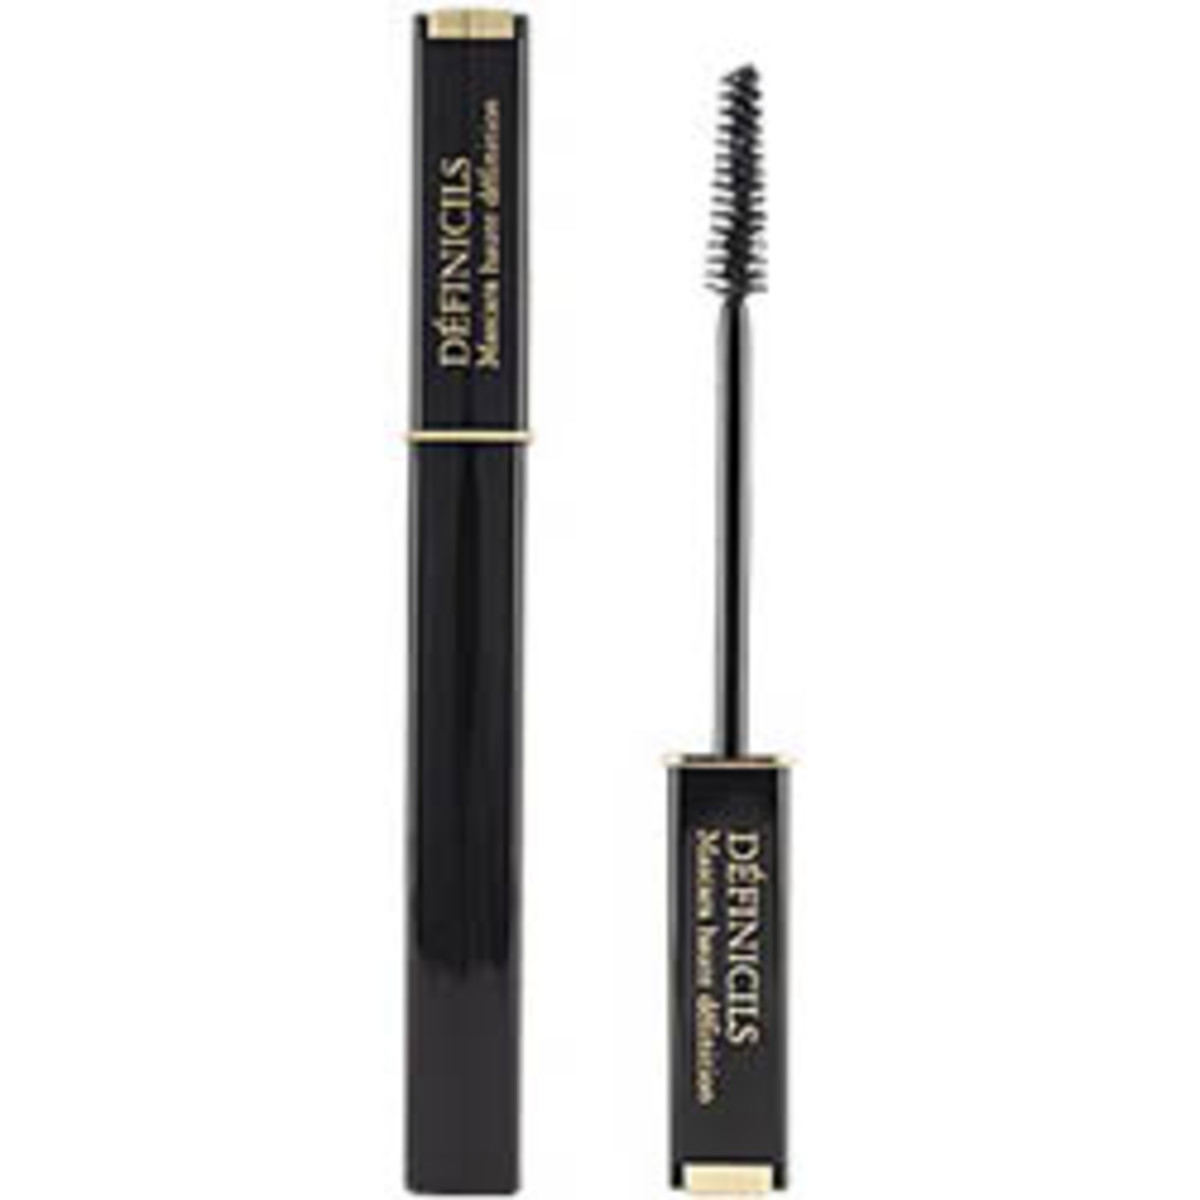 For an all-around top mascara, turn to Lancome Definicils.